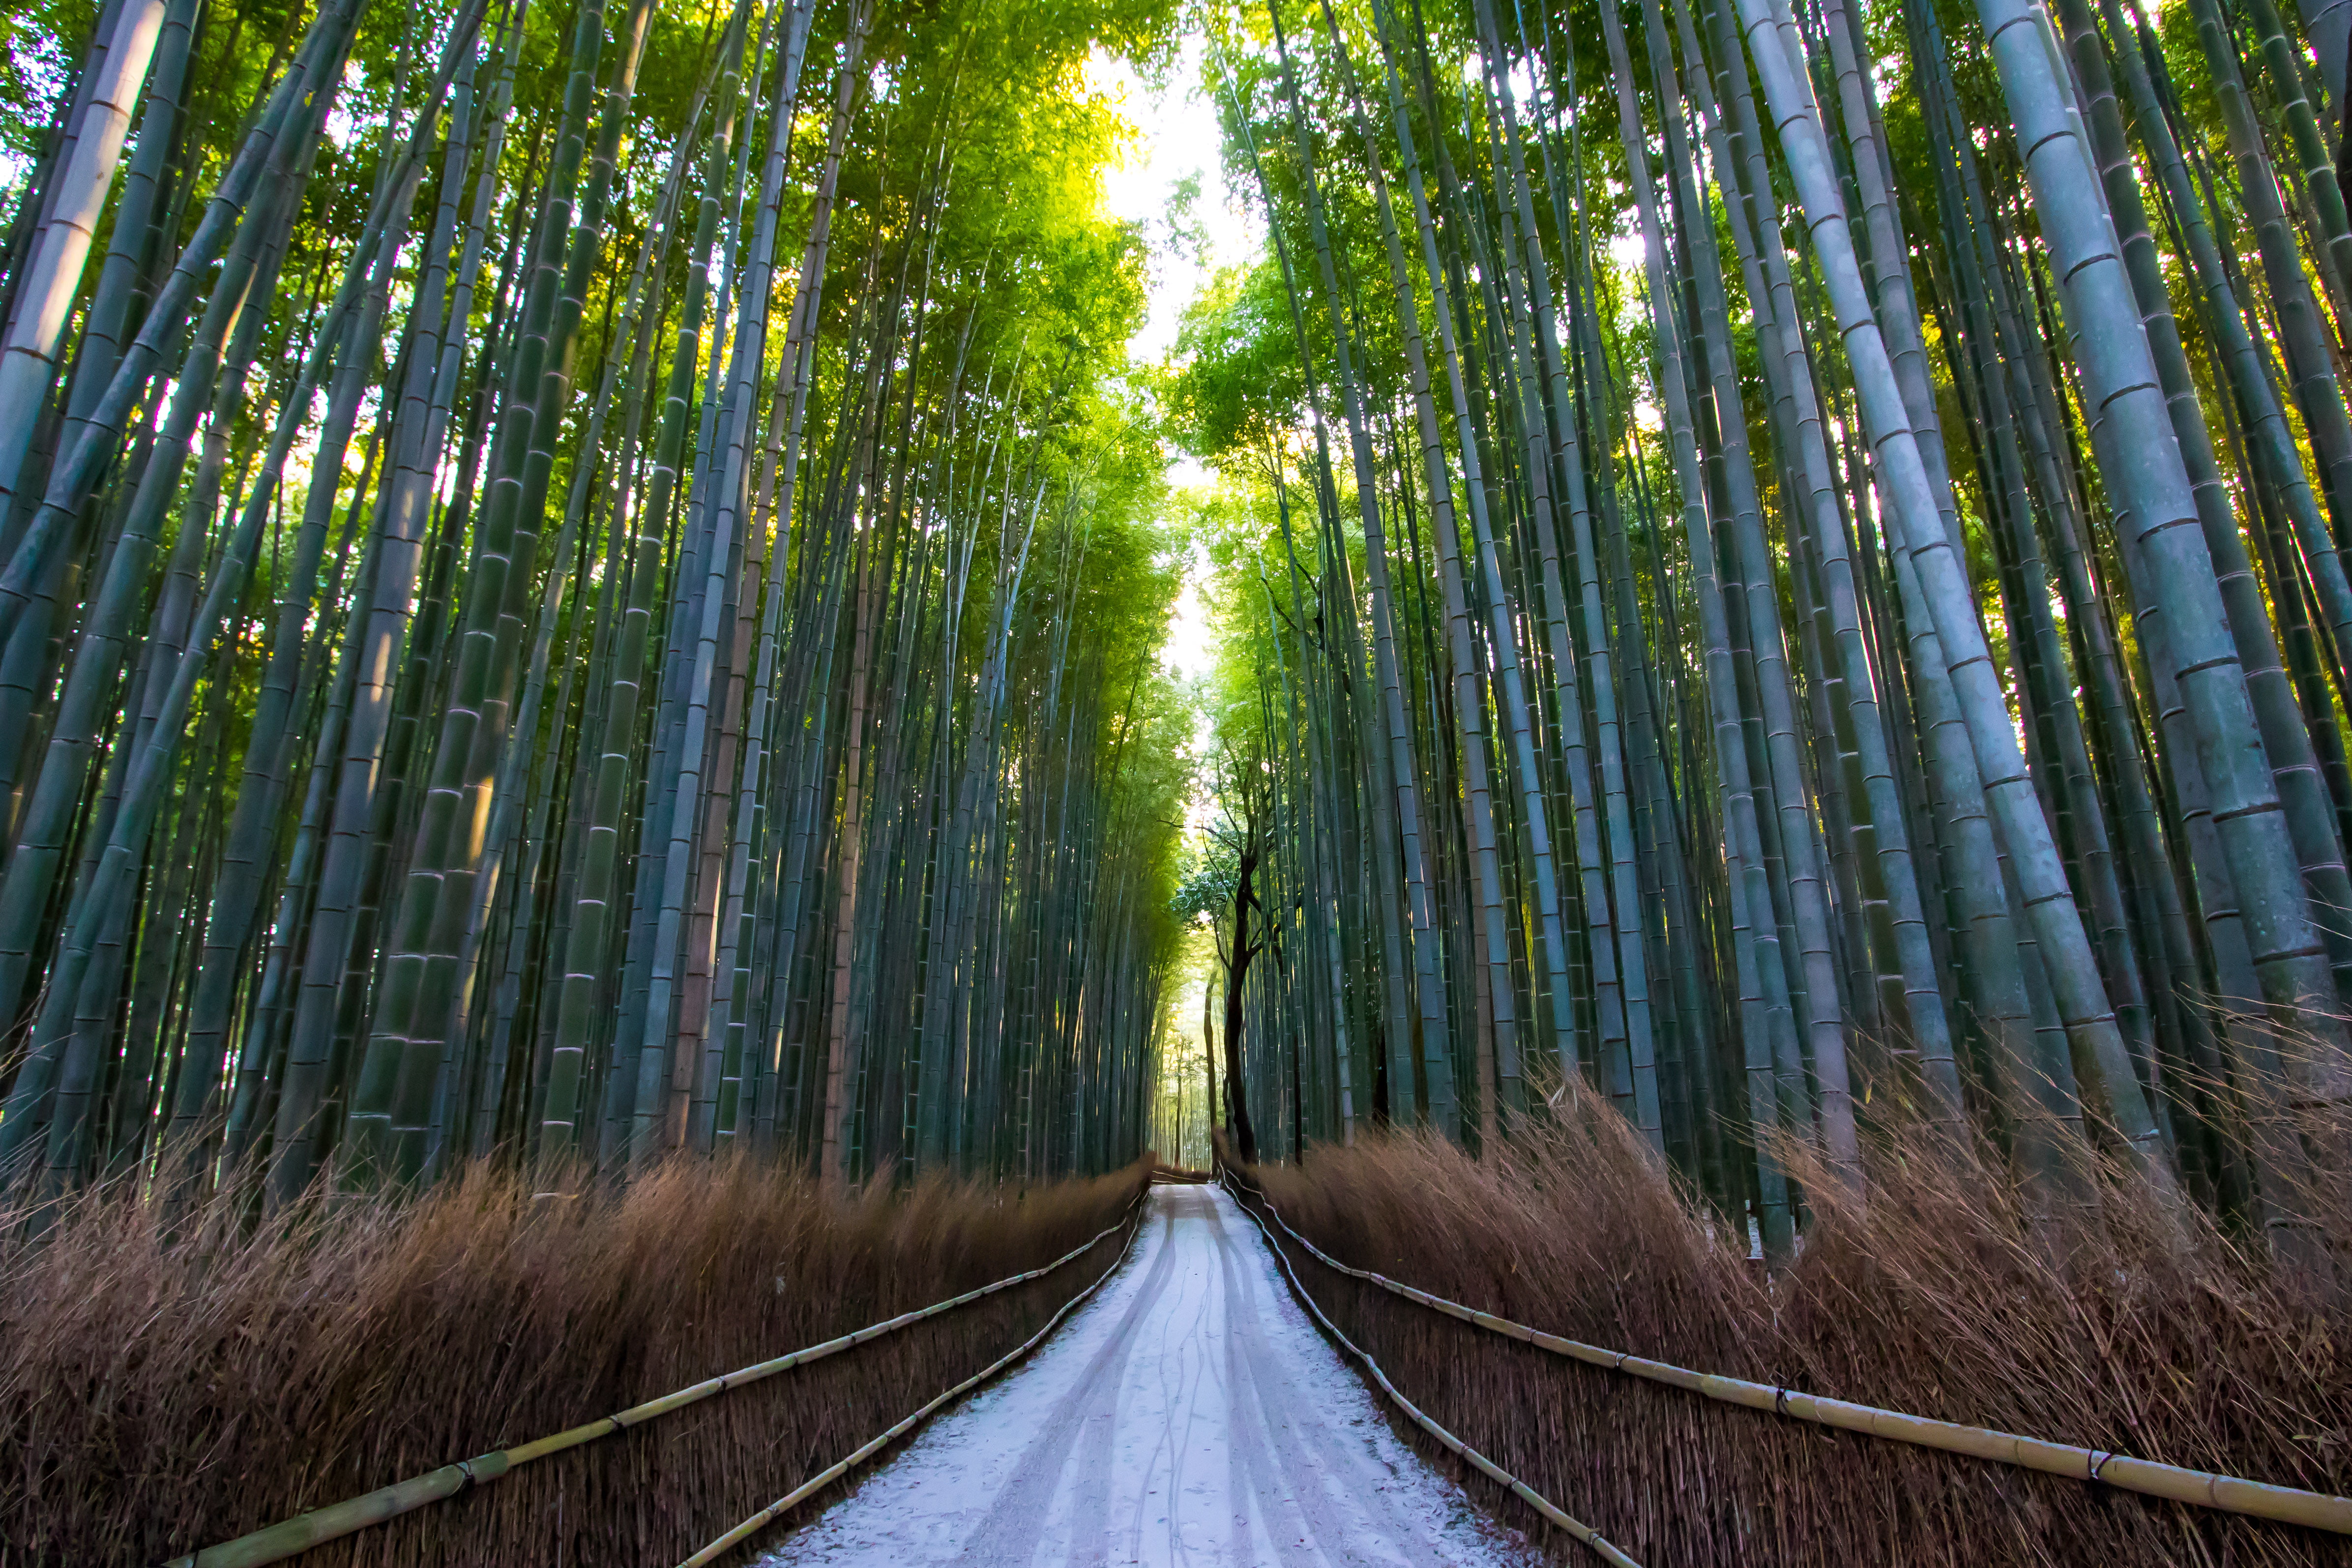 blue bamboo trees with a pathway